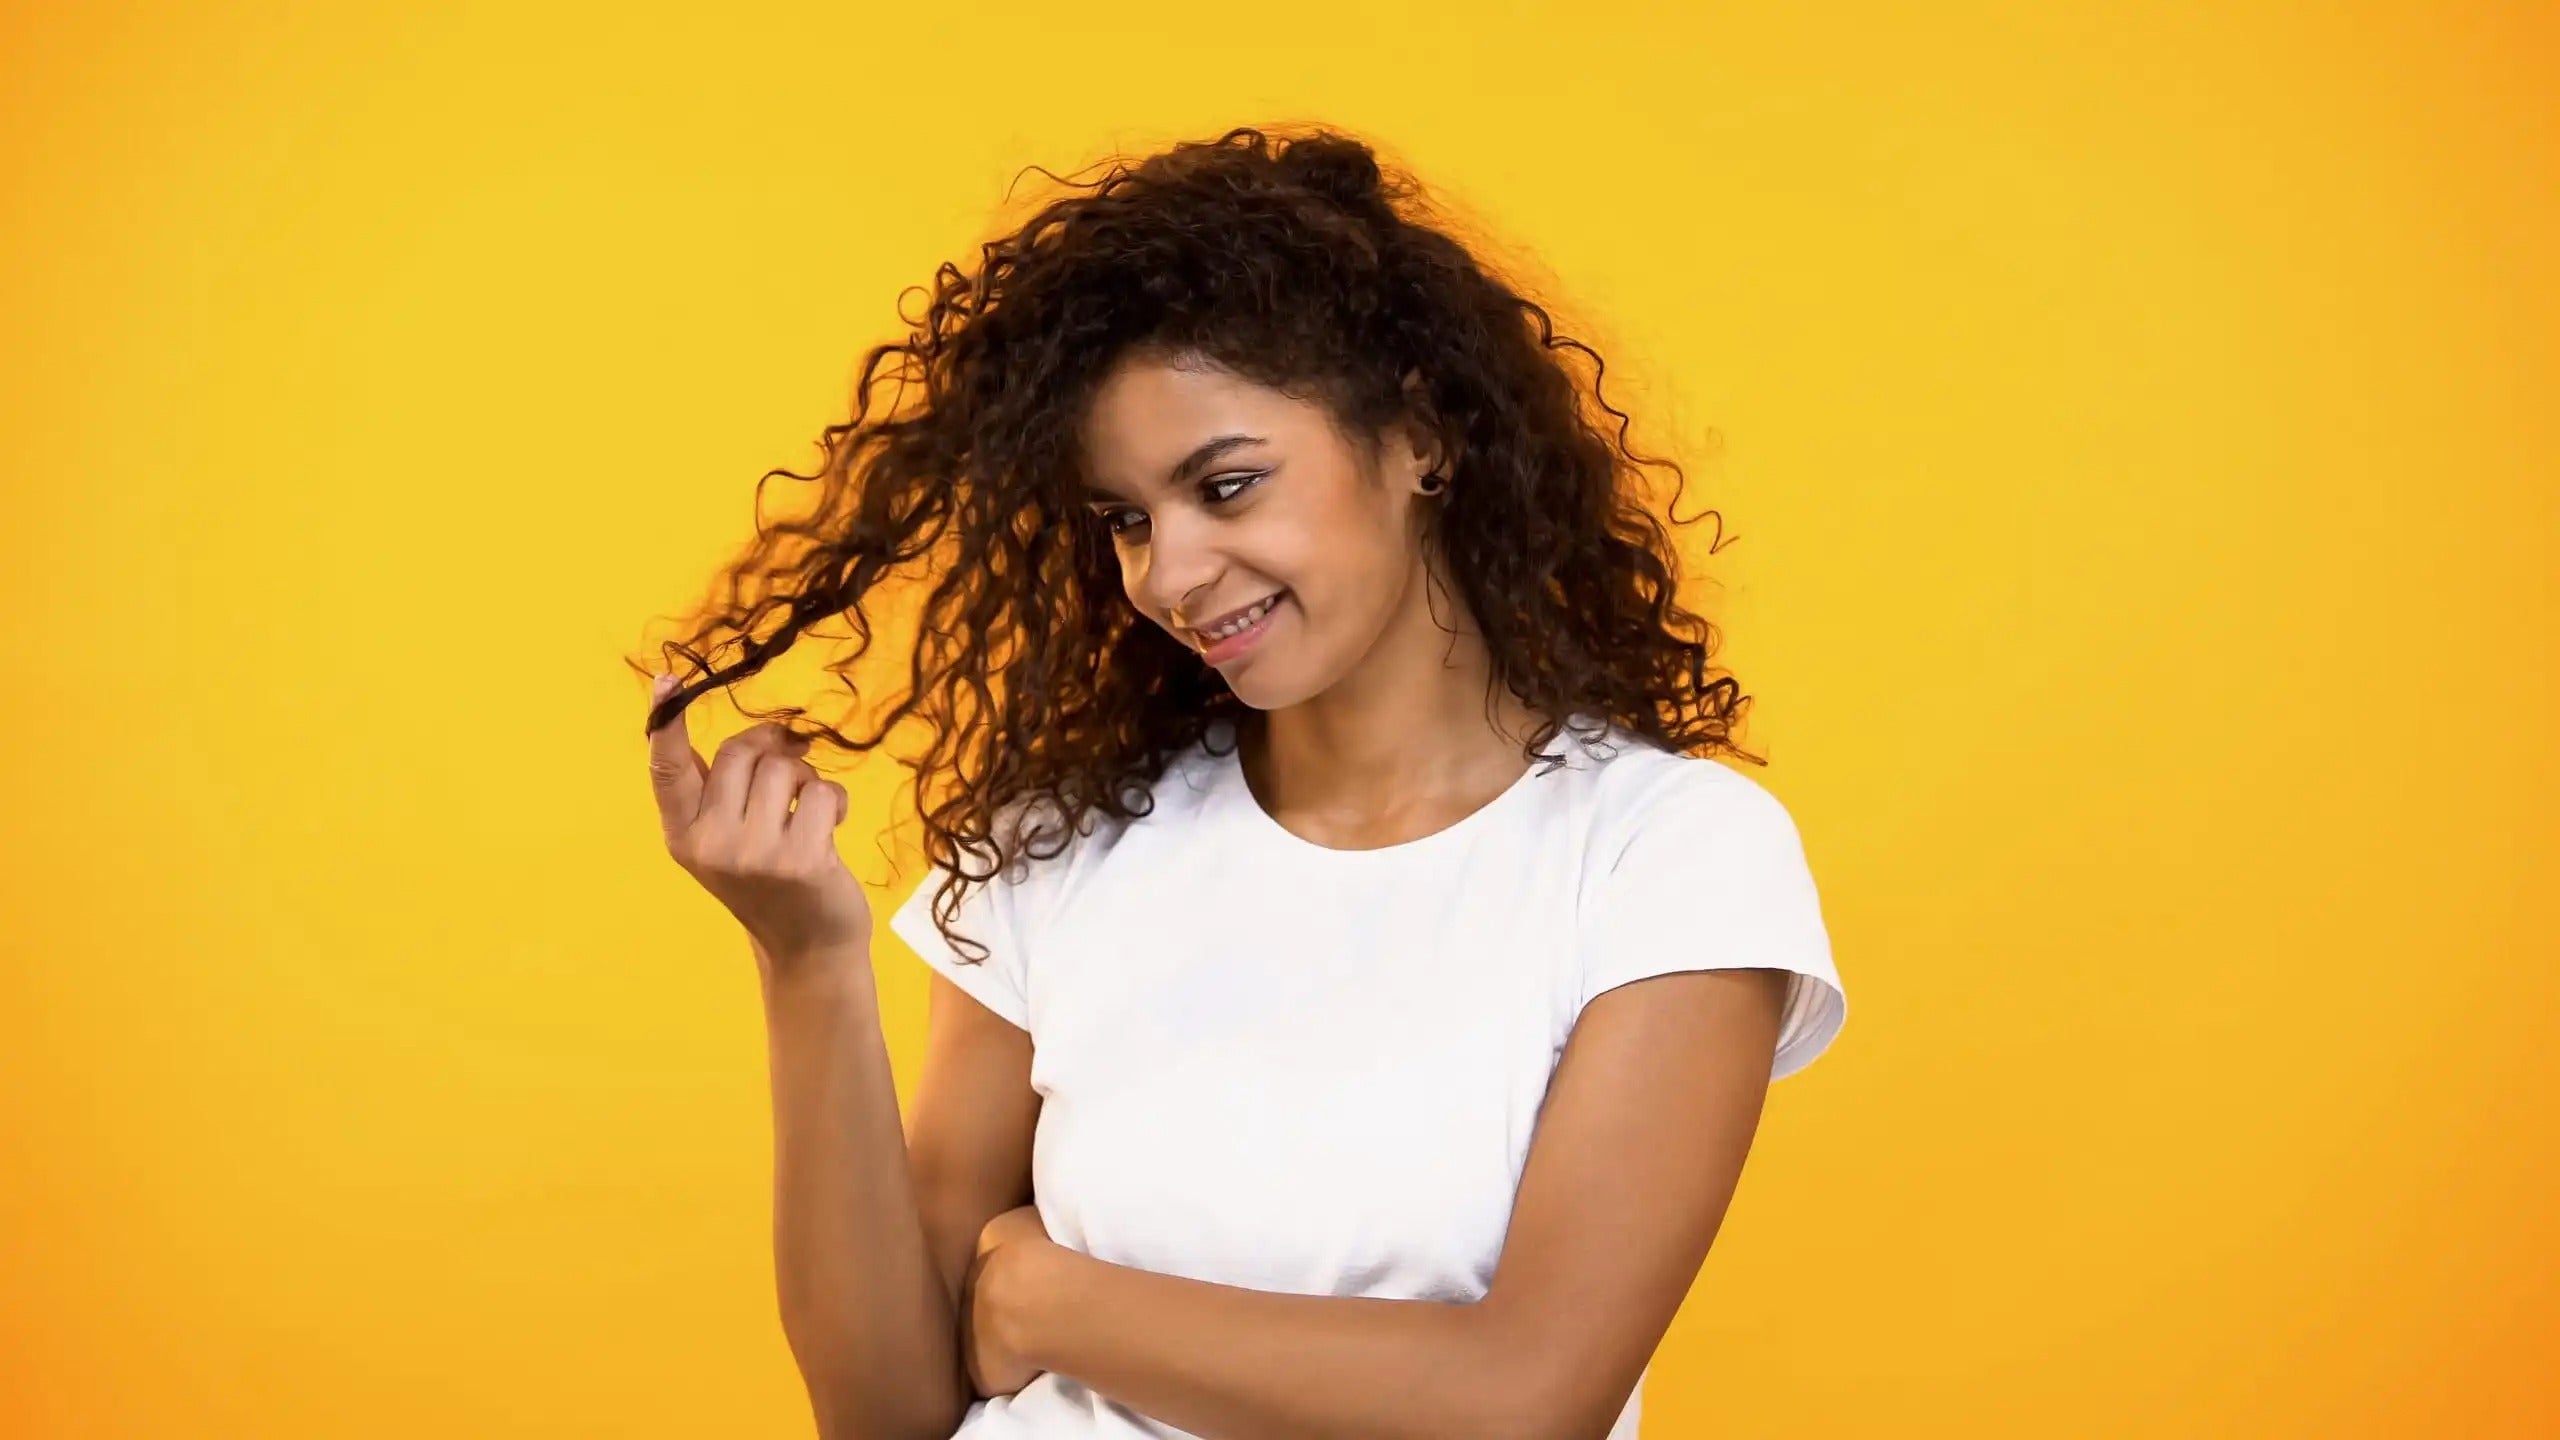 Woman with curly hair on yellow background